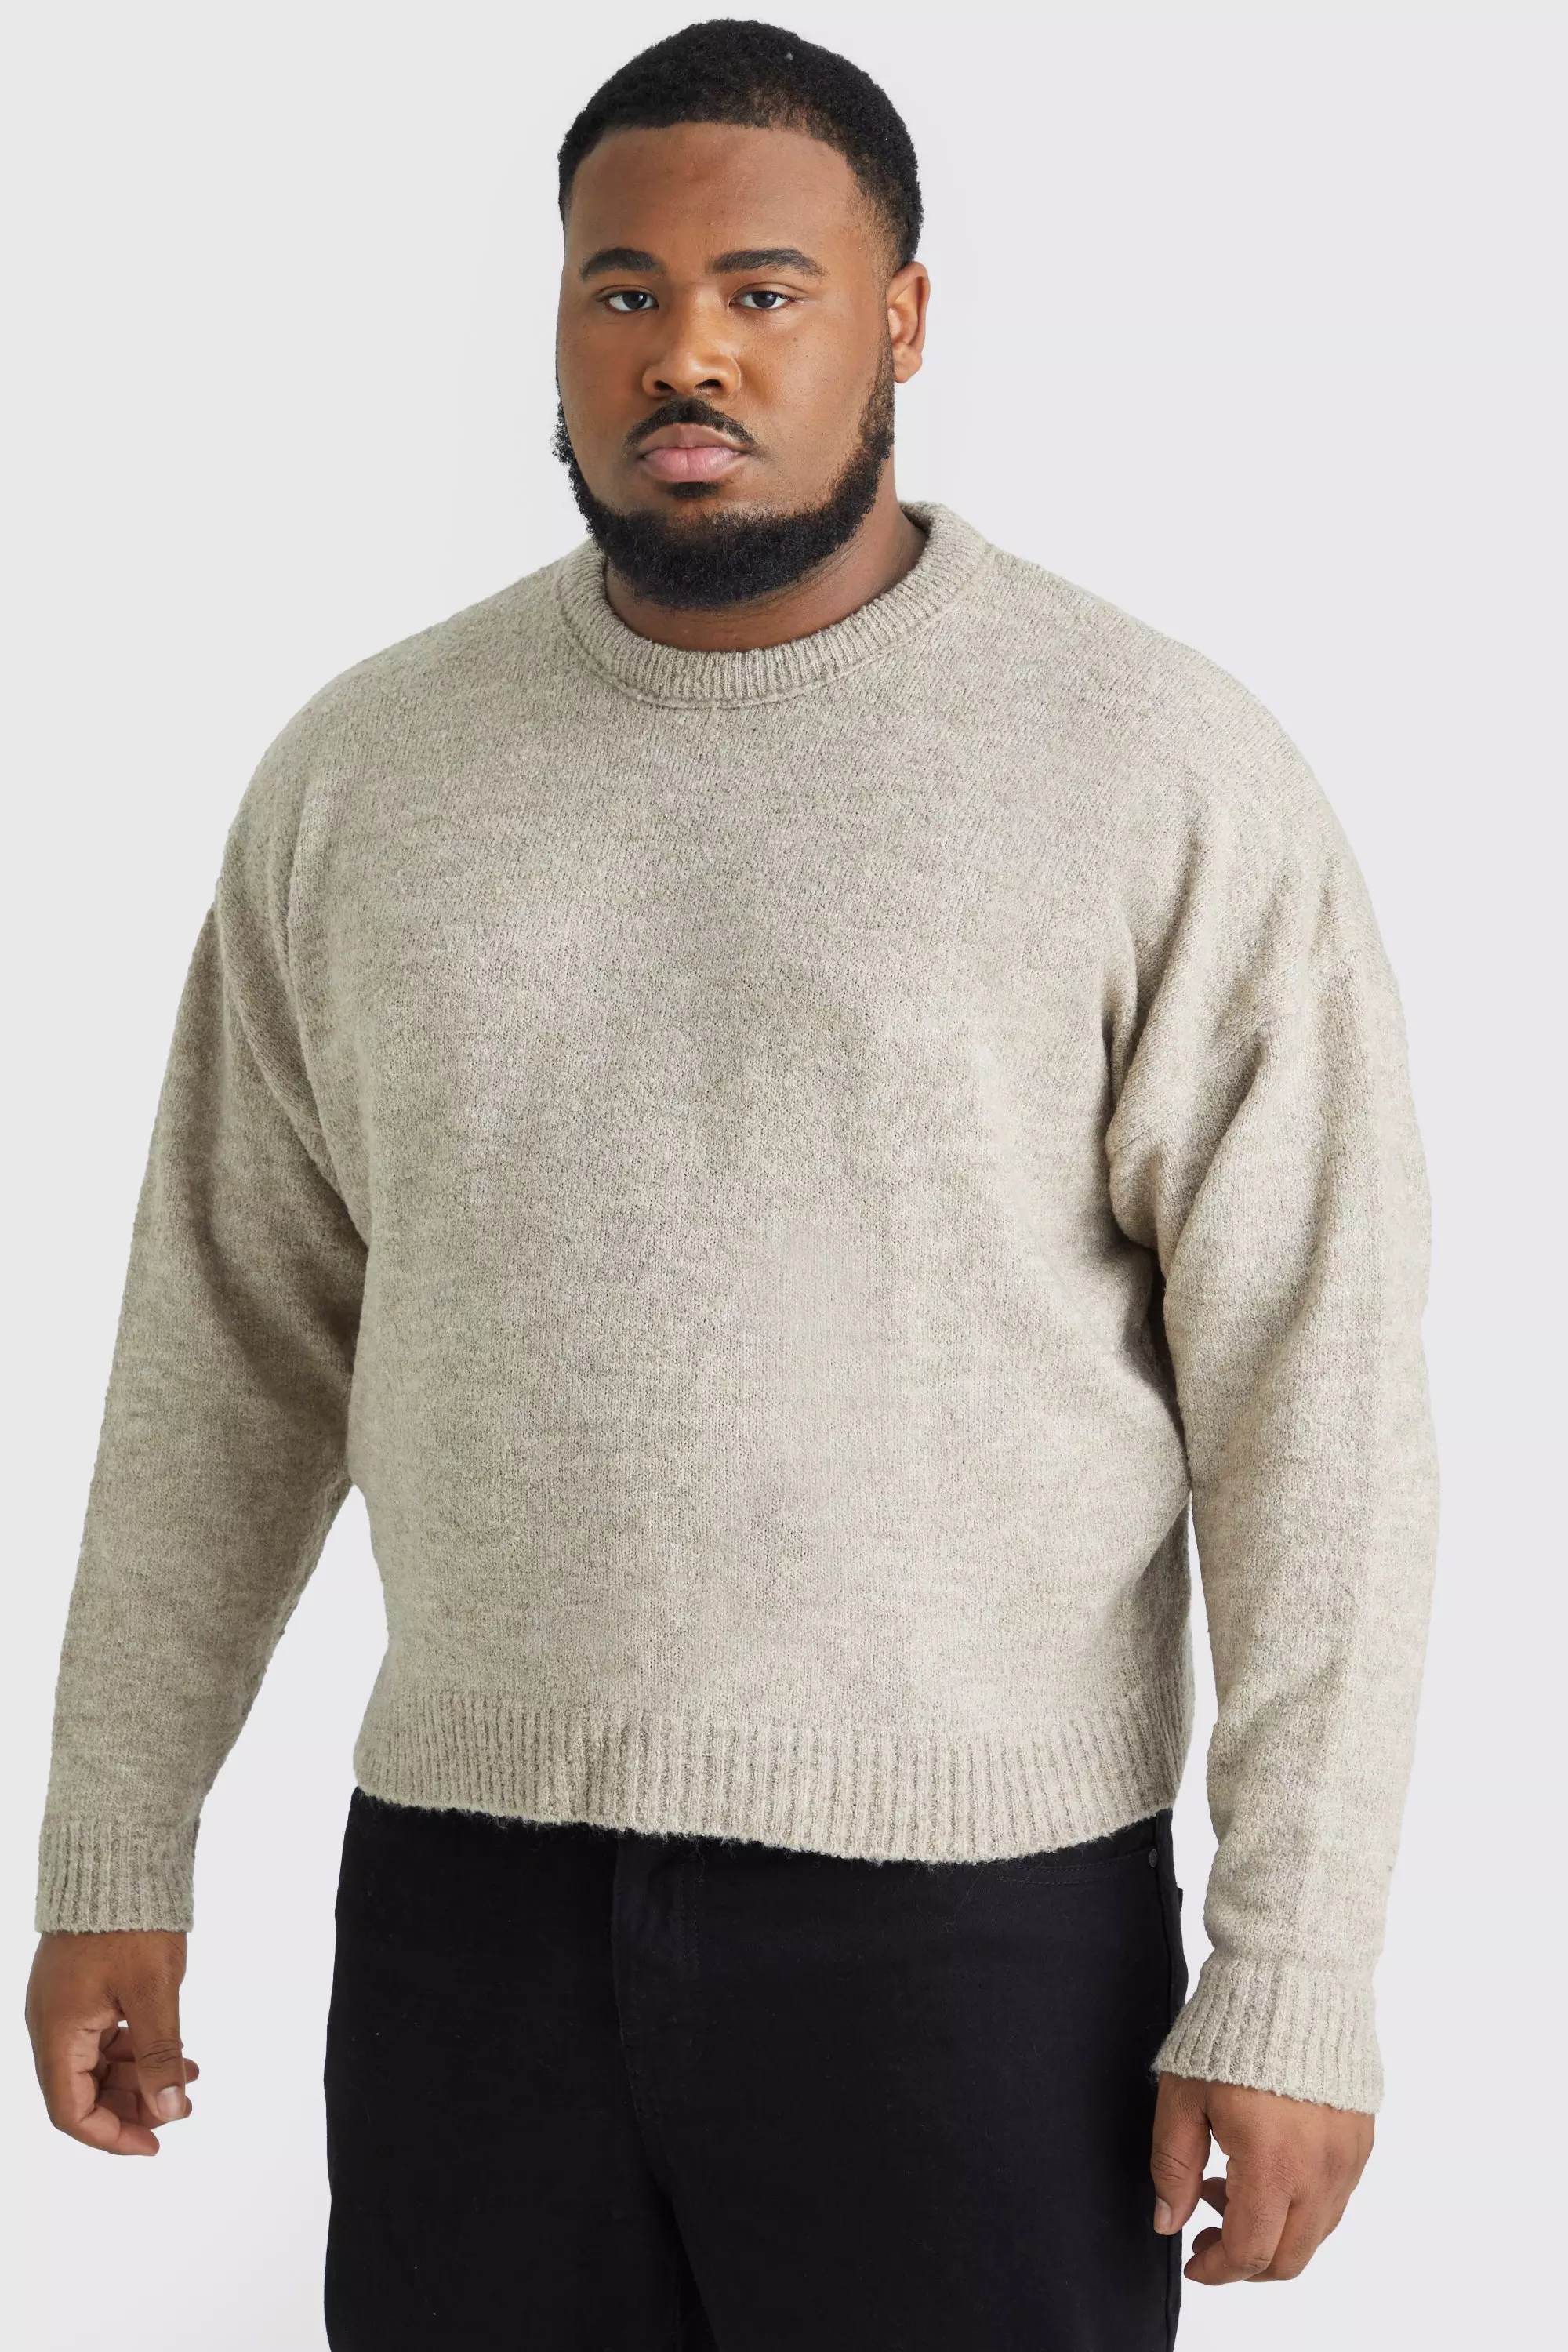 Plus Boxy Boucle Knit Extended Neck Sweater Stone